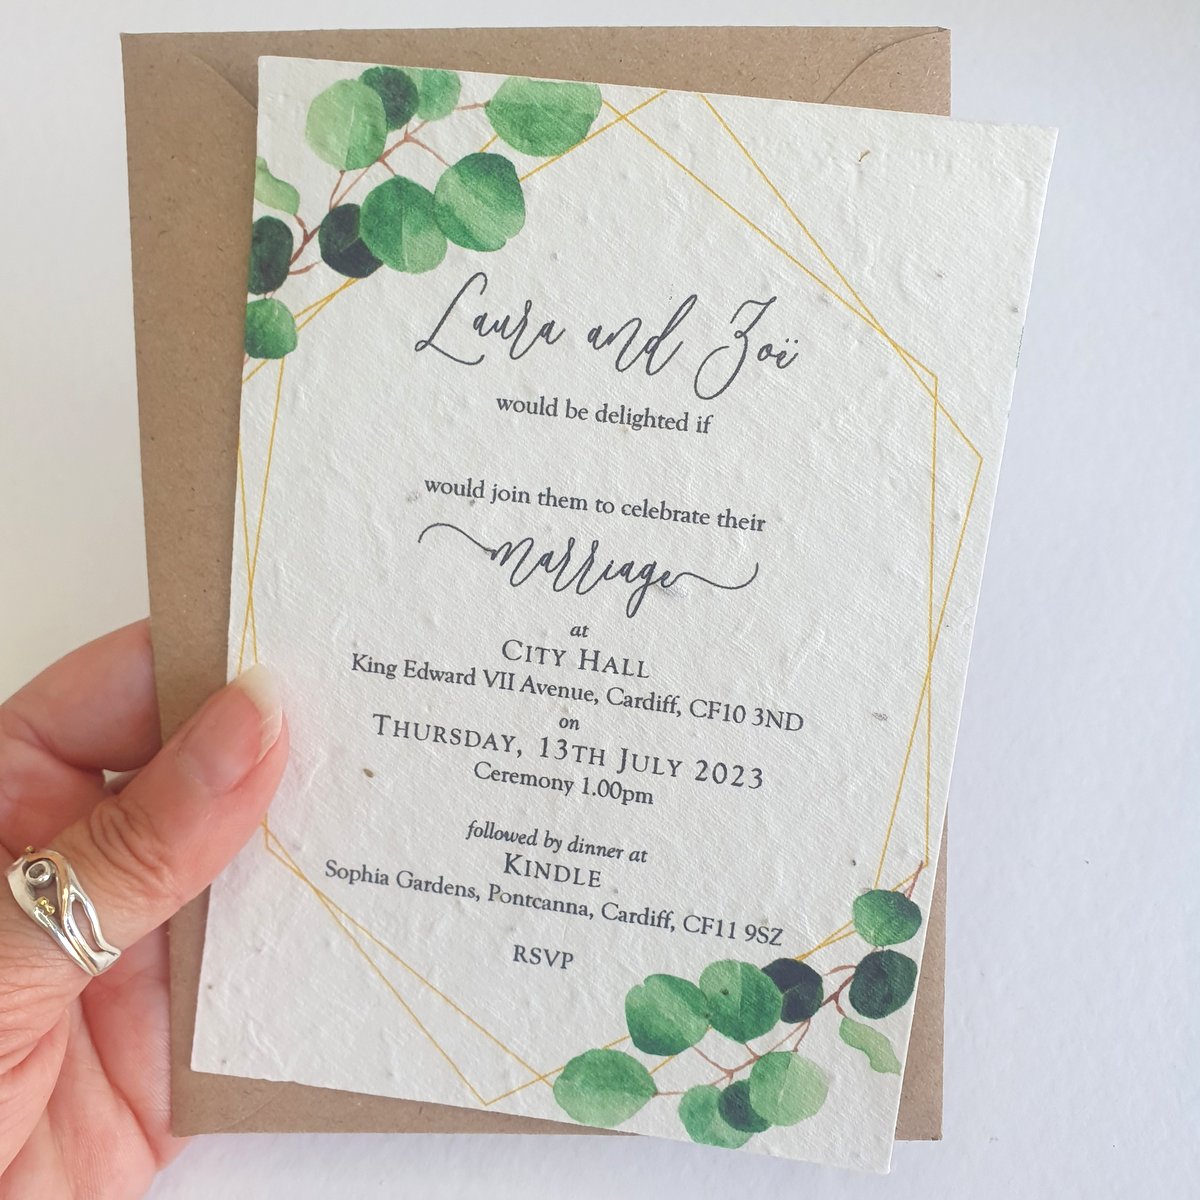 Plantable seed paper wedding invitations: Everything you ever need to know!